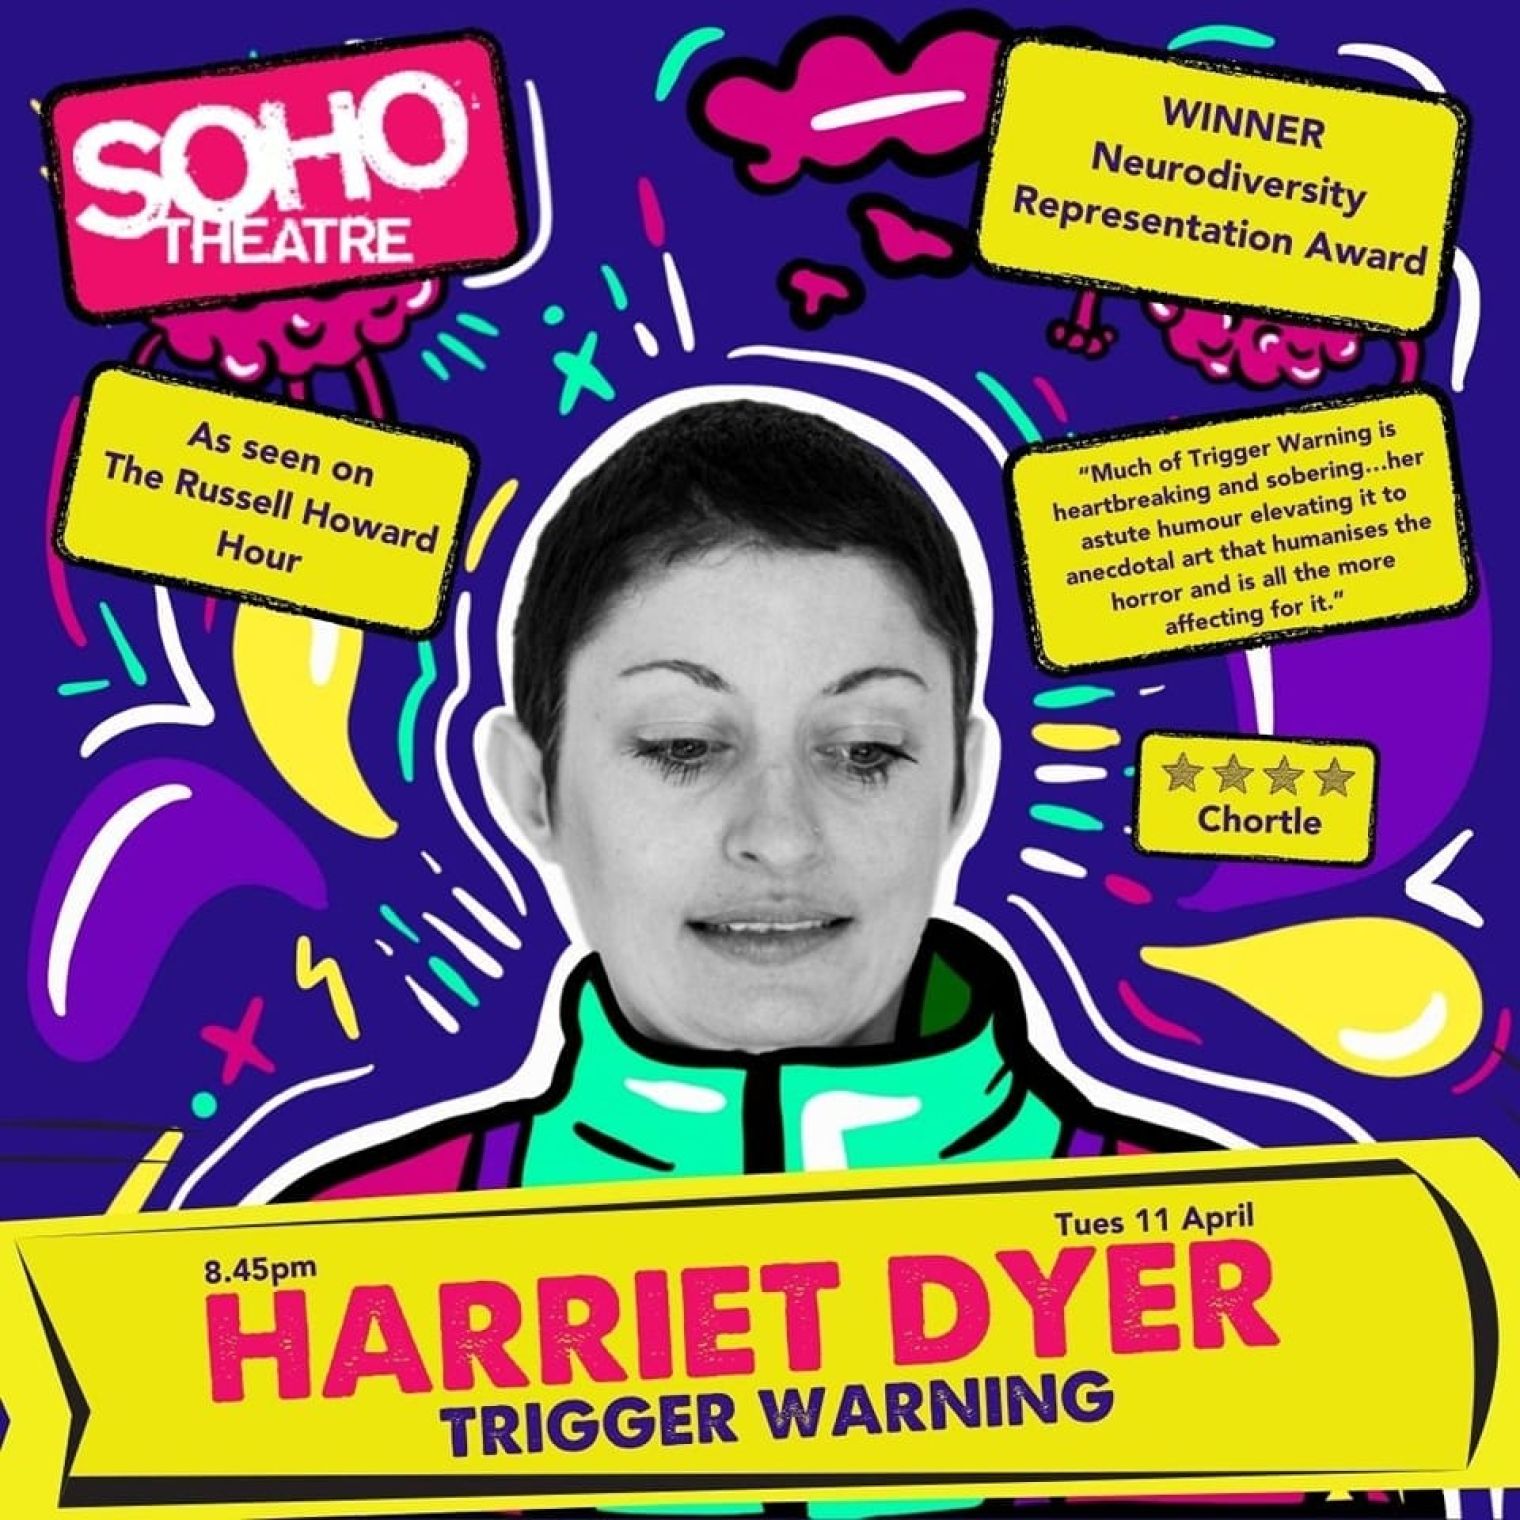 Catch Cornish comedian Harriet Dyer’s award-winning and “mesmerising” stand-up show ‘Trigger Warning’ at the Soho Theatre tonight